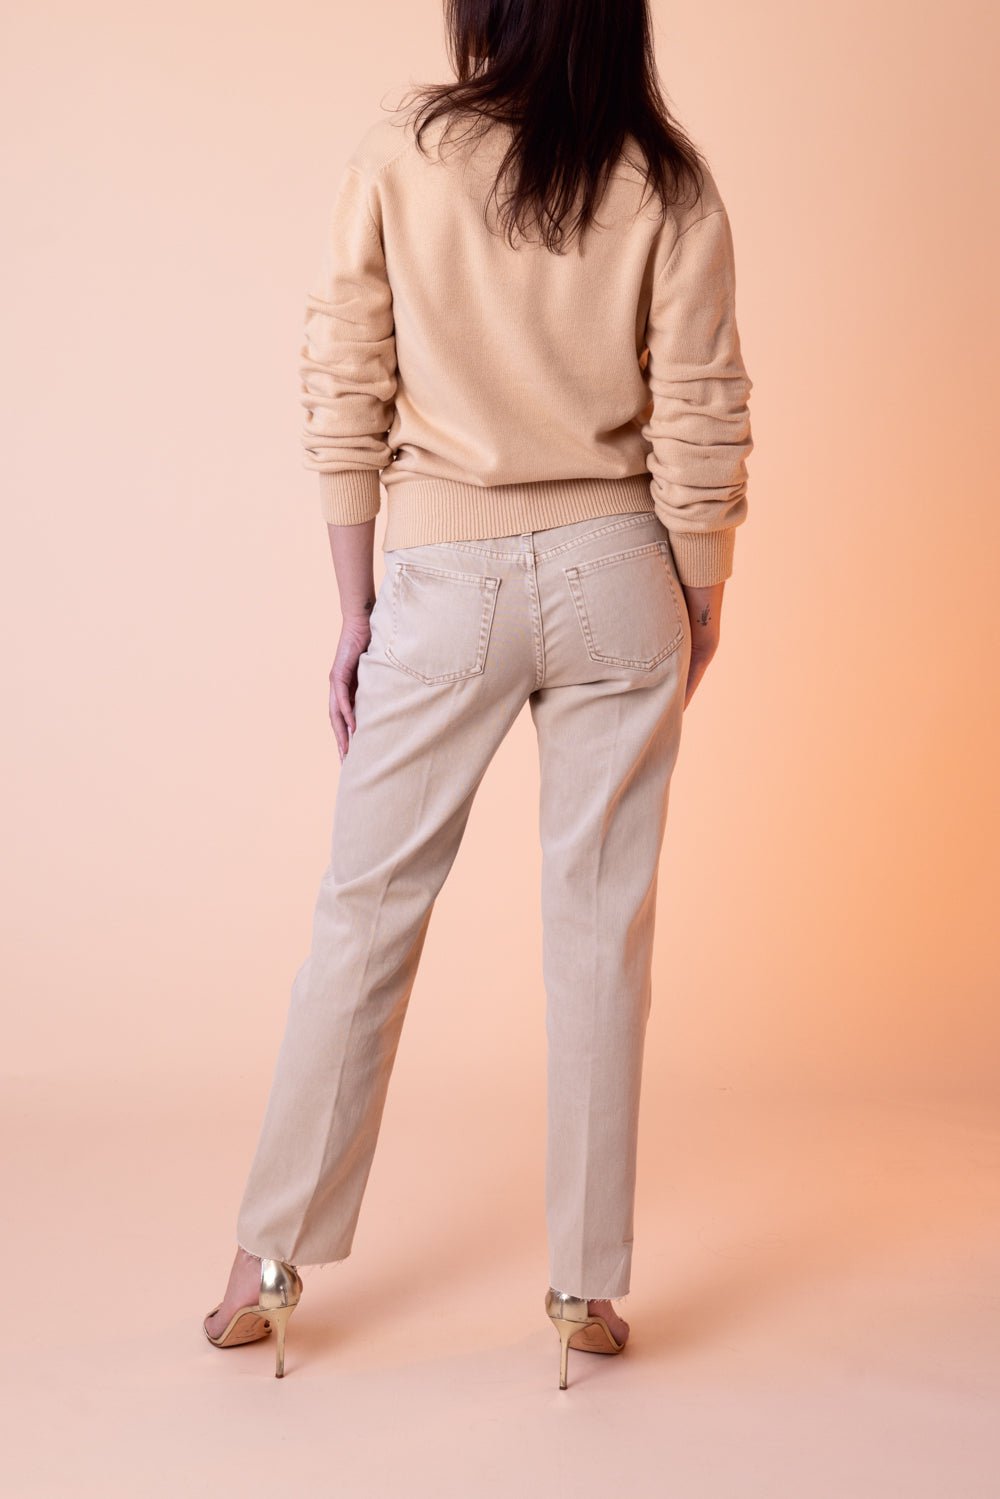 Crushed Sleeve Sweater - Nude CLOTHINGTOPSWEATER MICHAEL KORS COLLECTION   